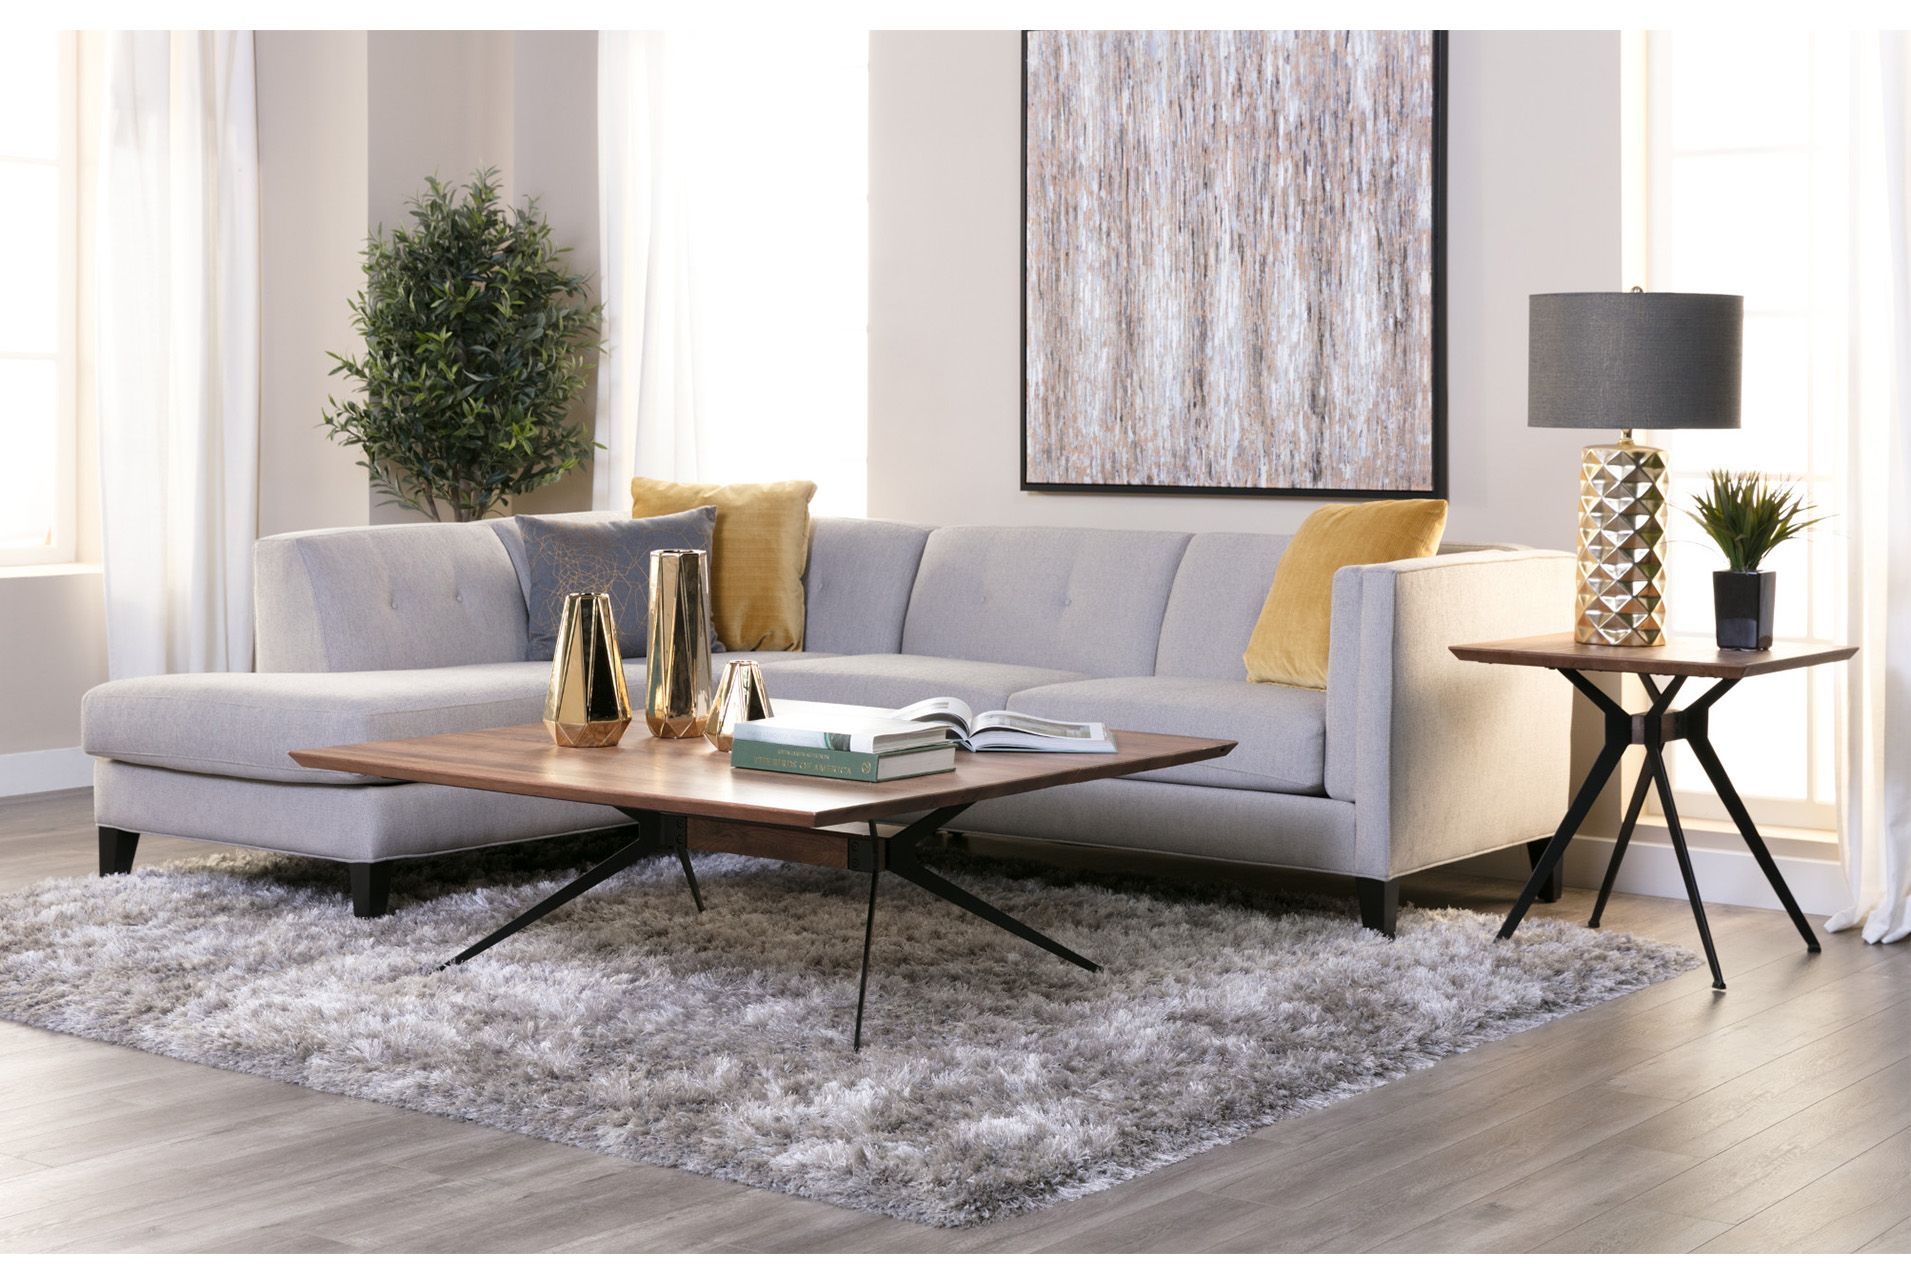 Avery 2 Piece Sectional W/laf Armless Chaise | Glam Living Intended For Avery 2 Piece Sectionals With Laf Armless Chaise (View 8 of 15)